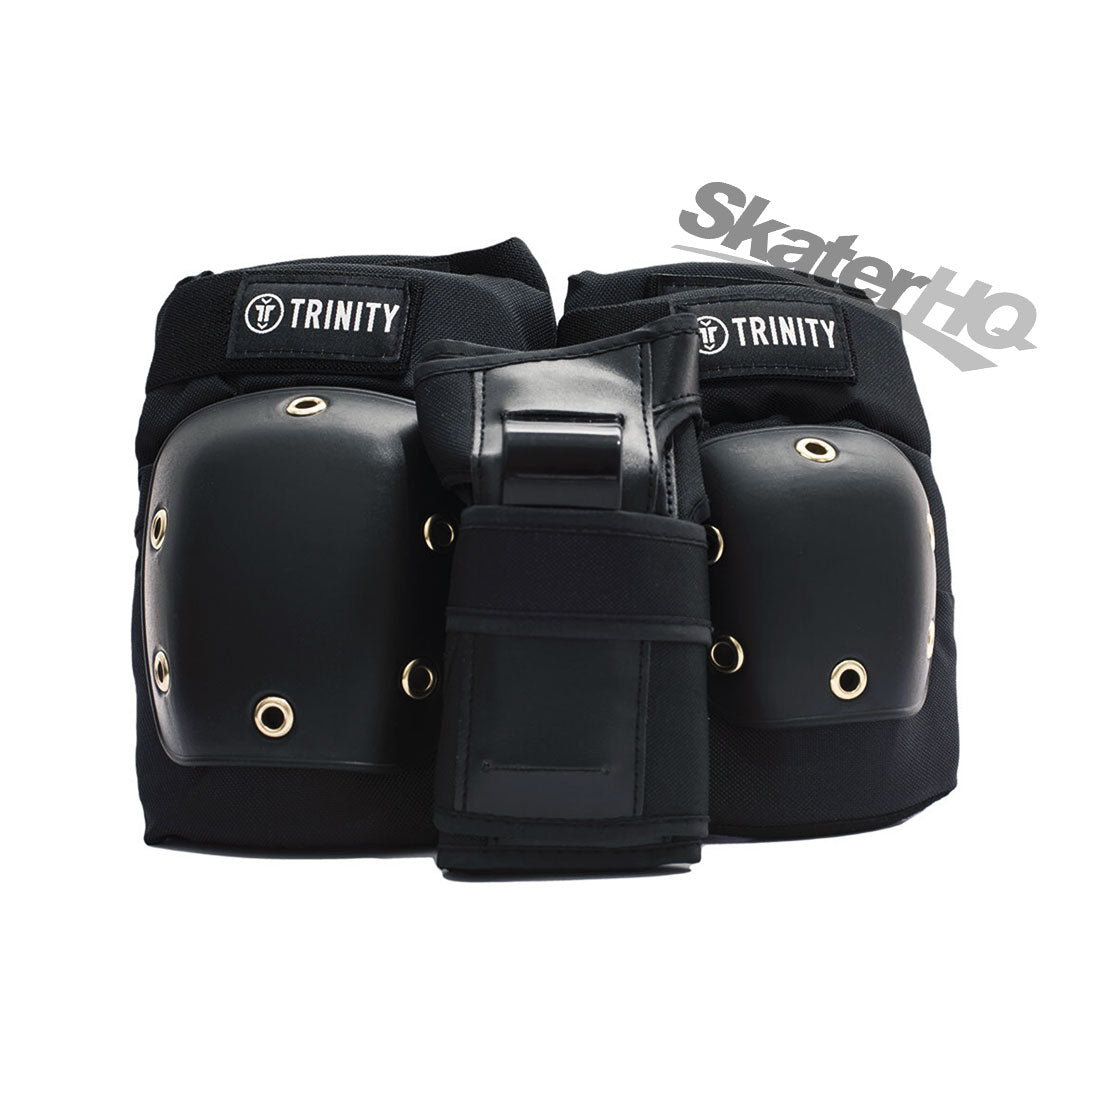 Trinity Tri-Pack Black - Large Protective Gear